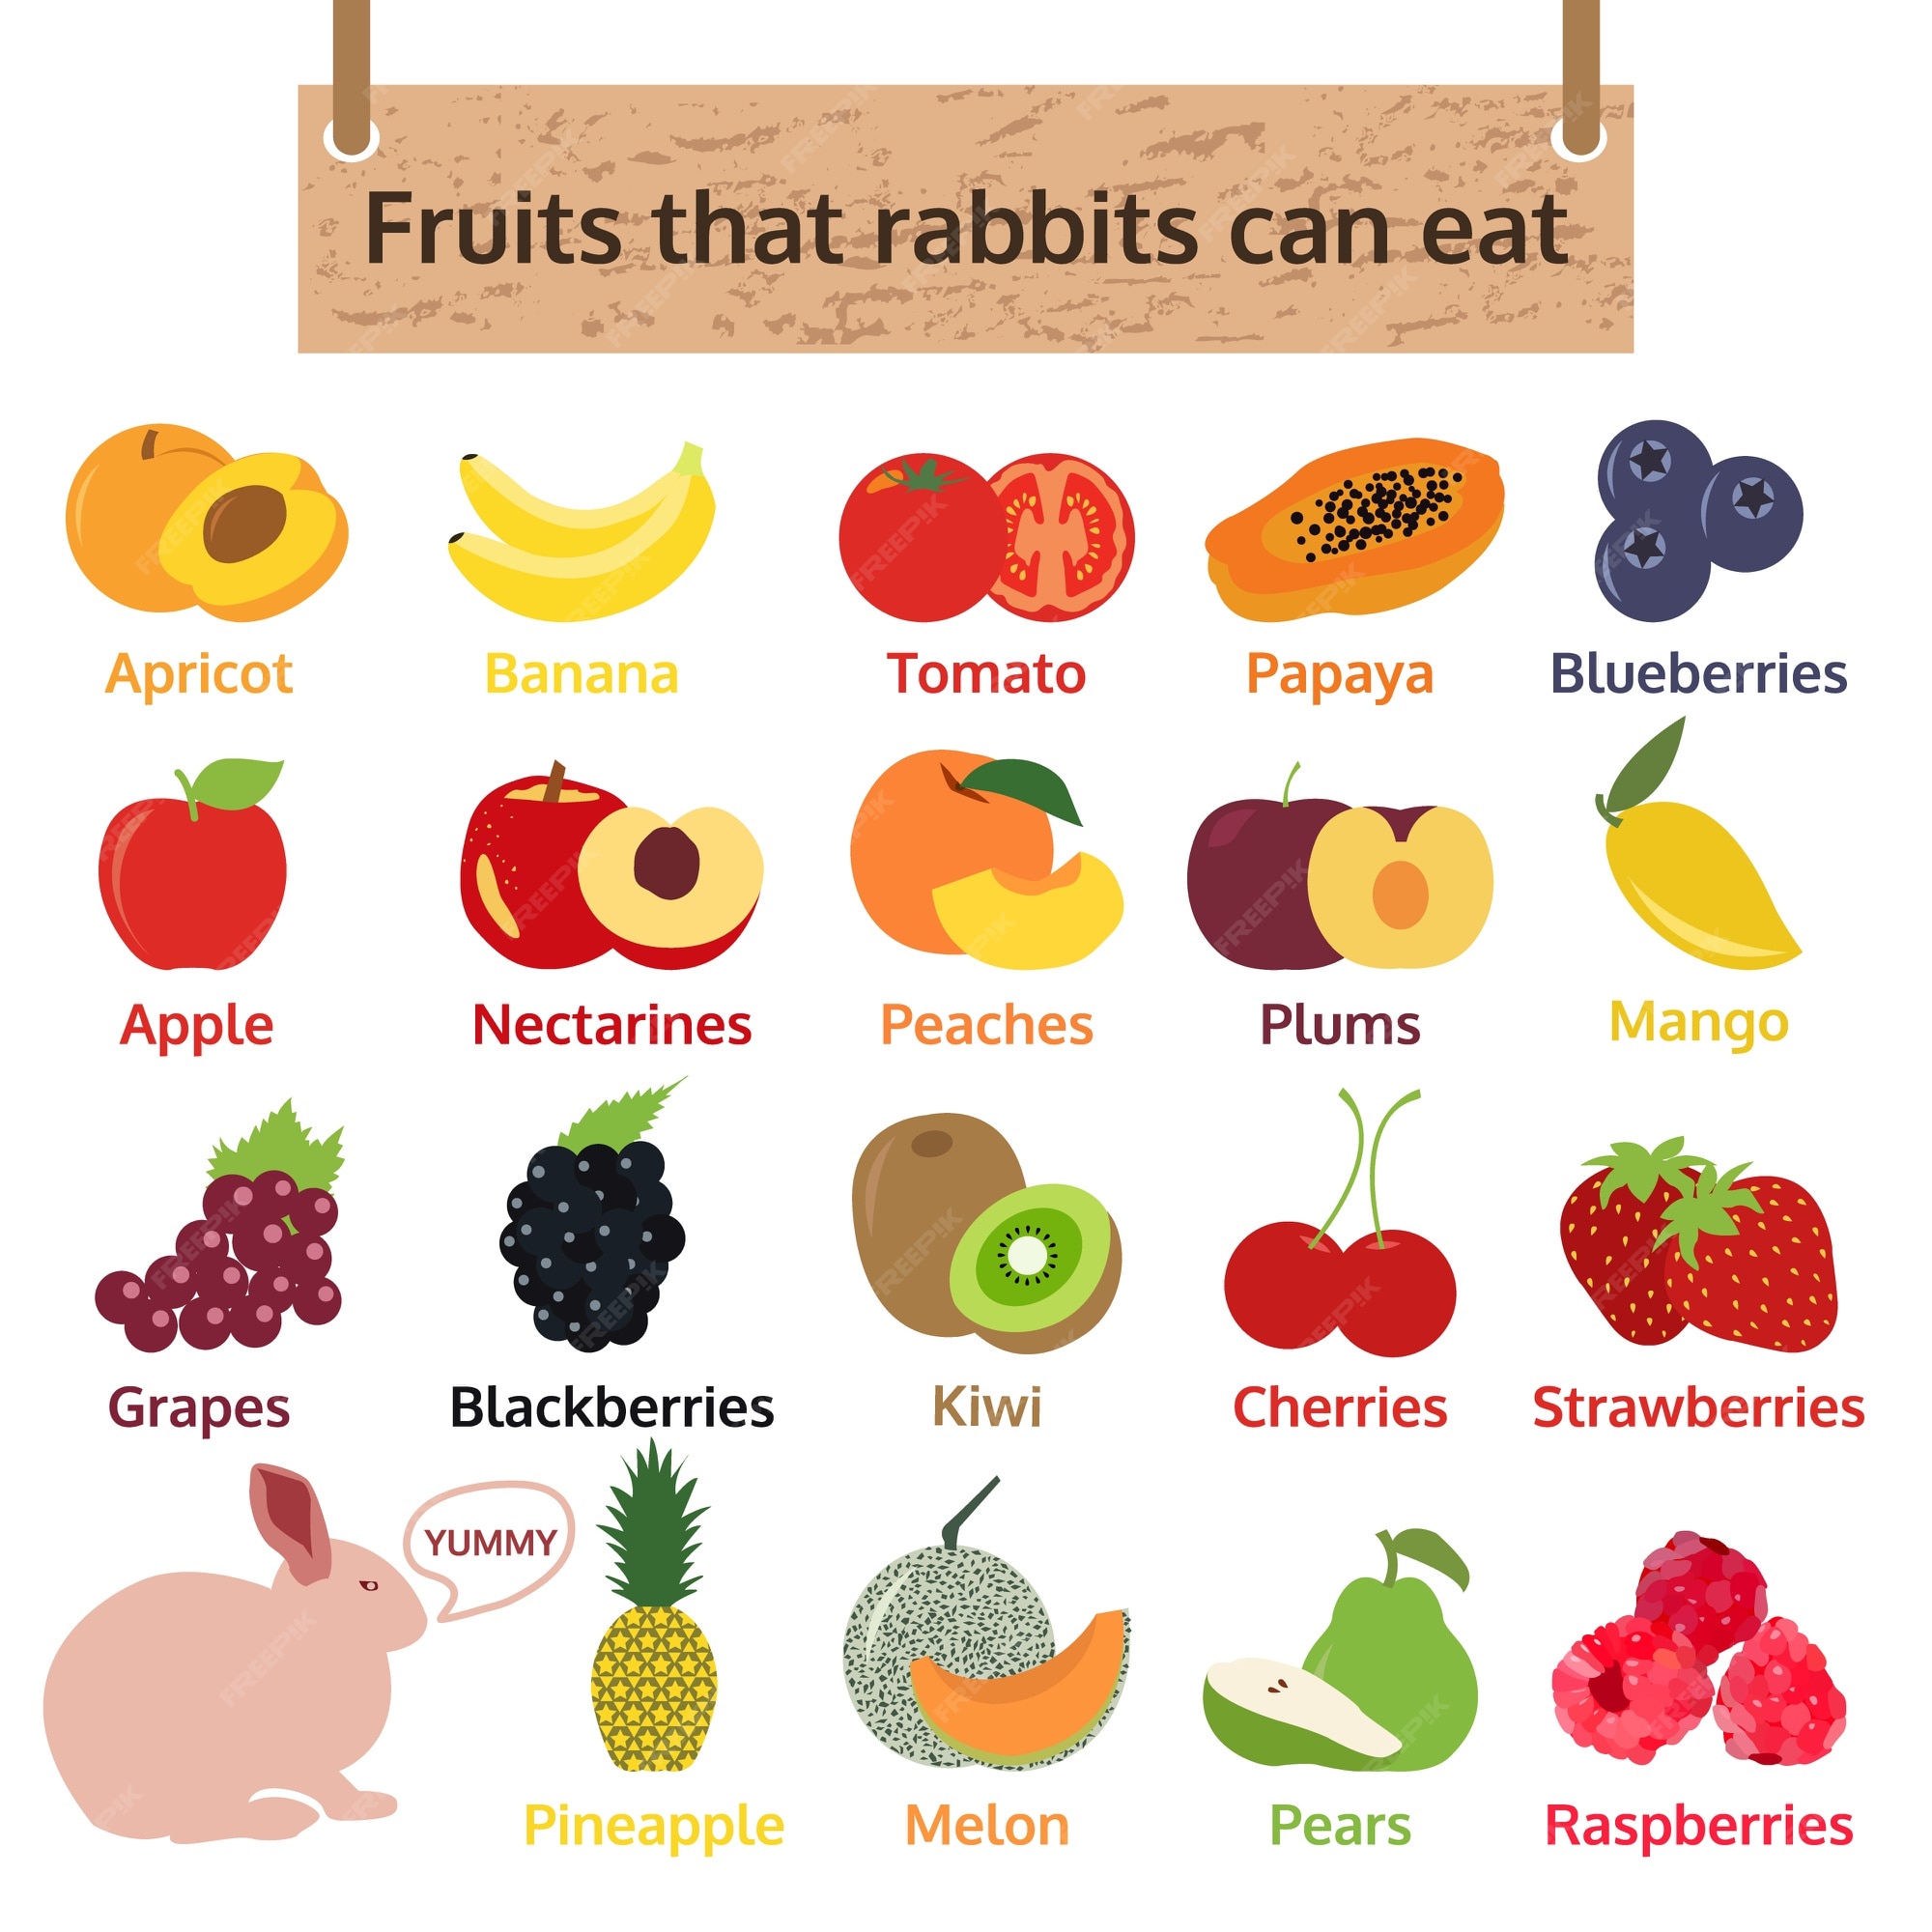 what fruits can rabbits eat